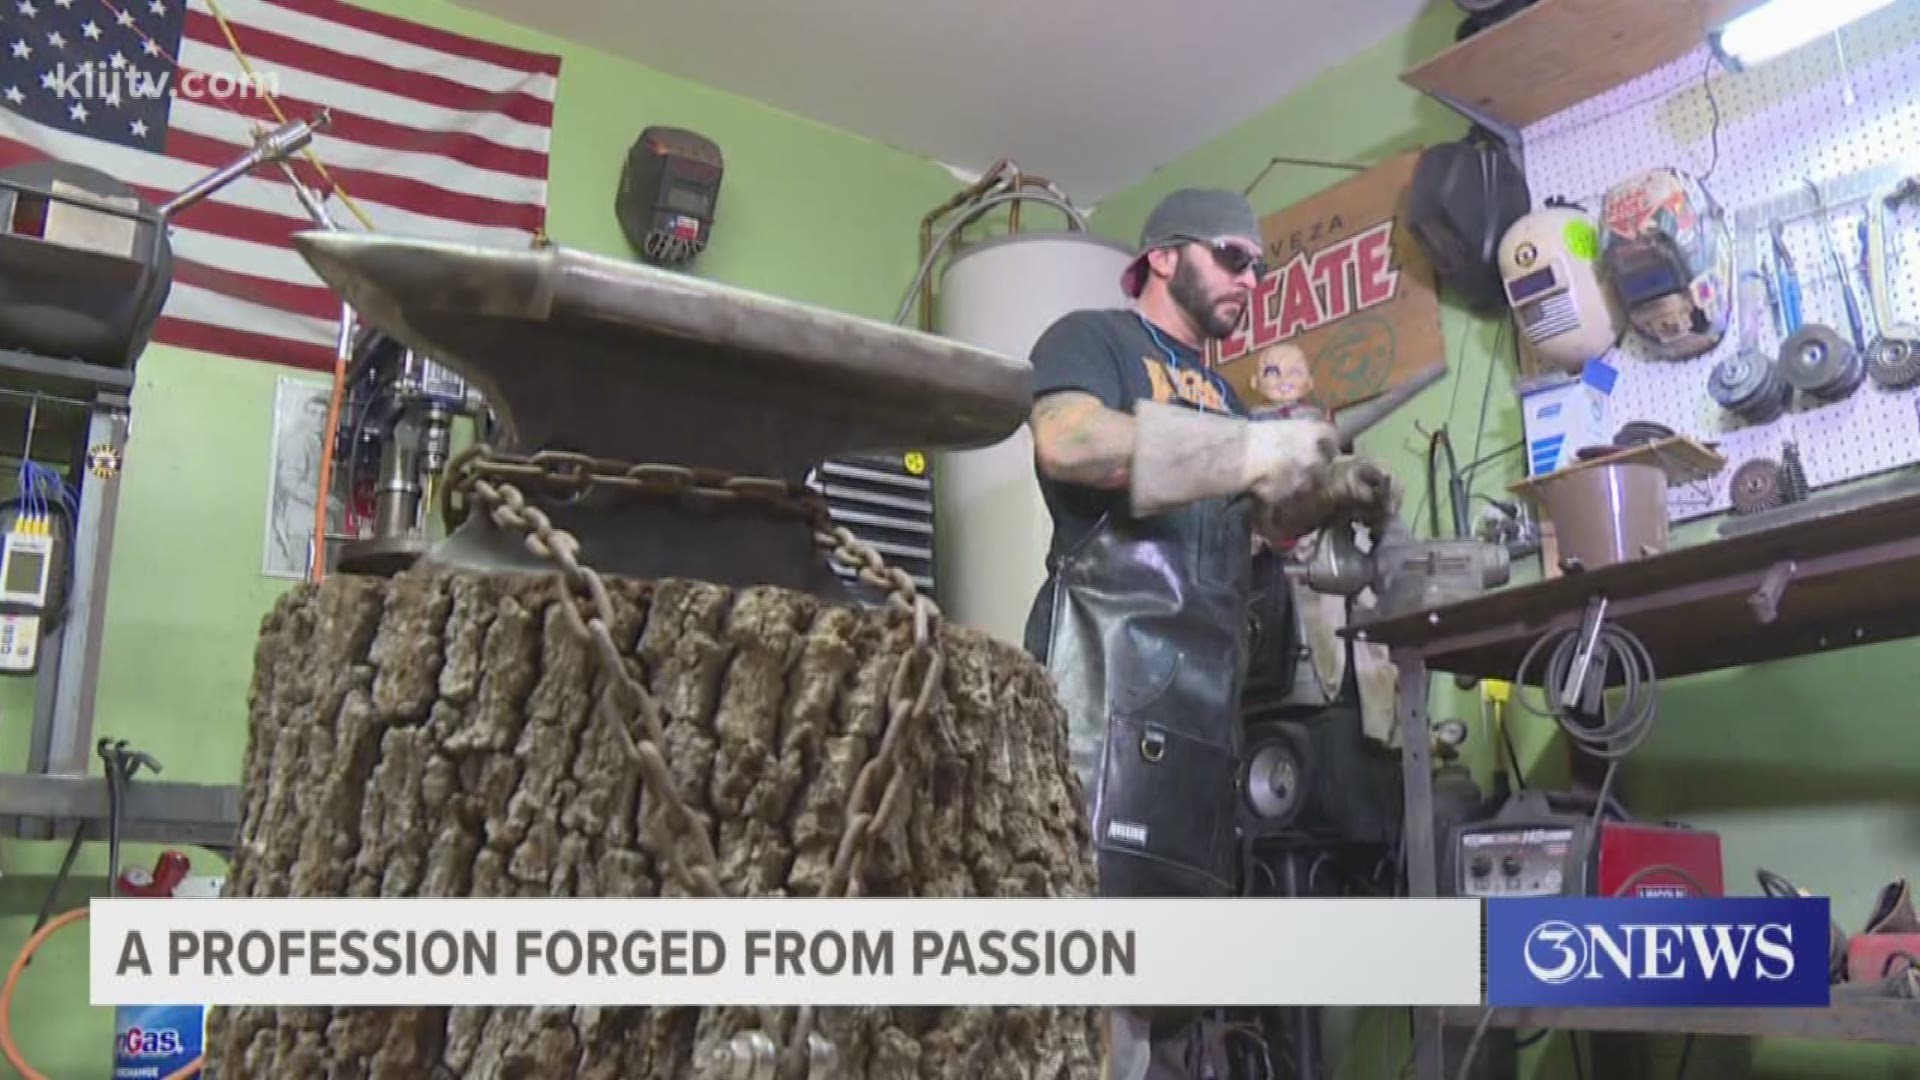 A Coastal Bend resident has taken his hobby of bladesmithing to the next level.